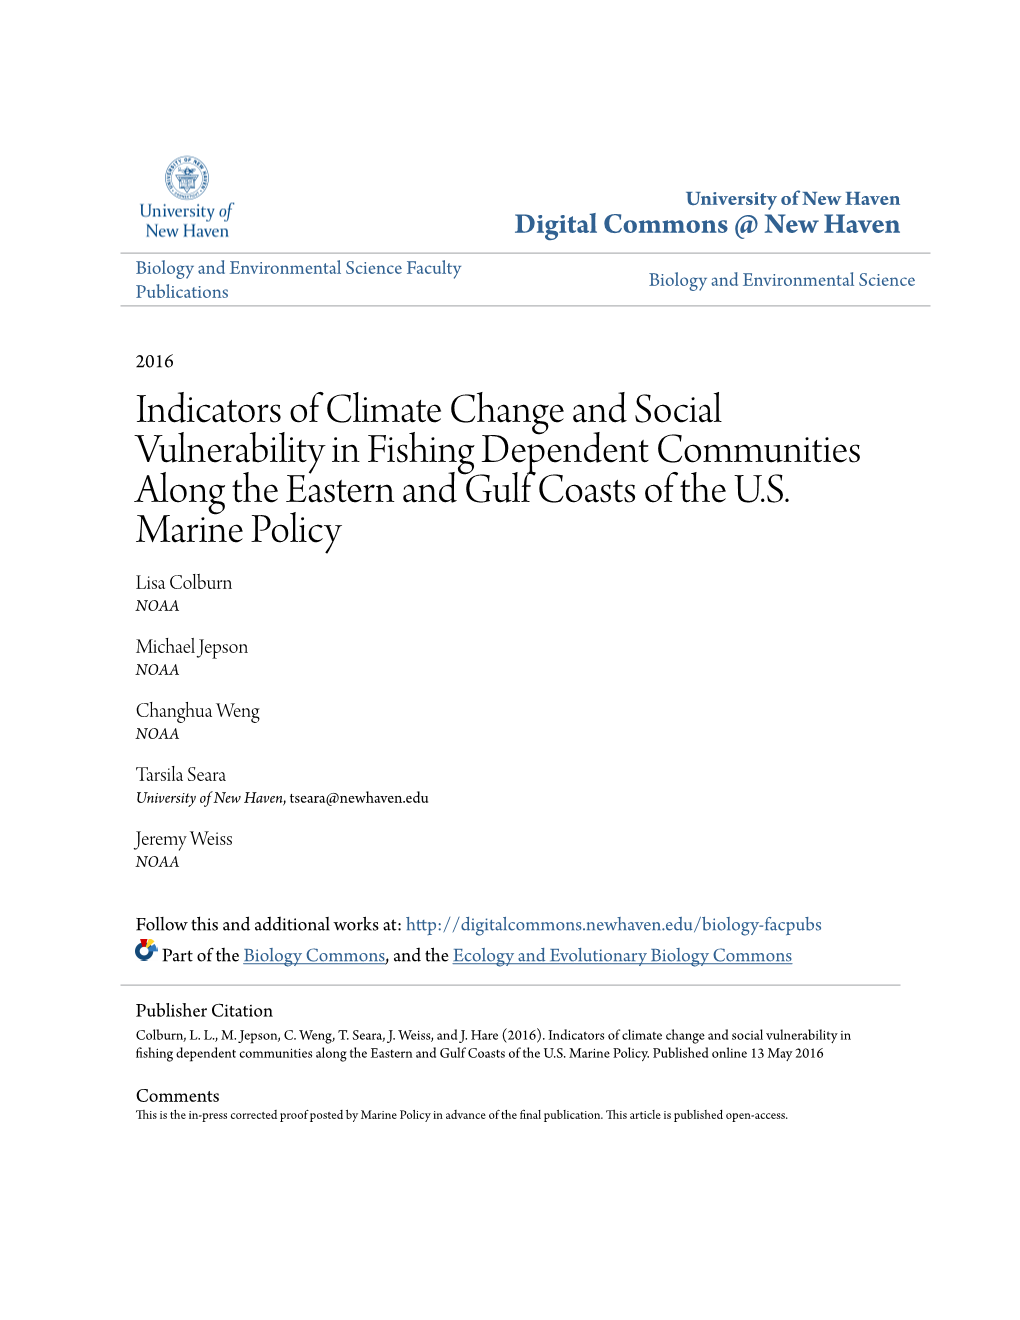 Indicators of Climate Change and Social Vulnerability in Fishing Dependent Communities Along the Eastern and Gulf Coasts of the U.S